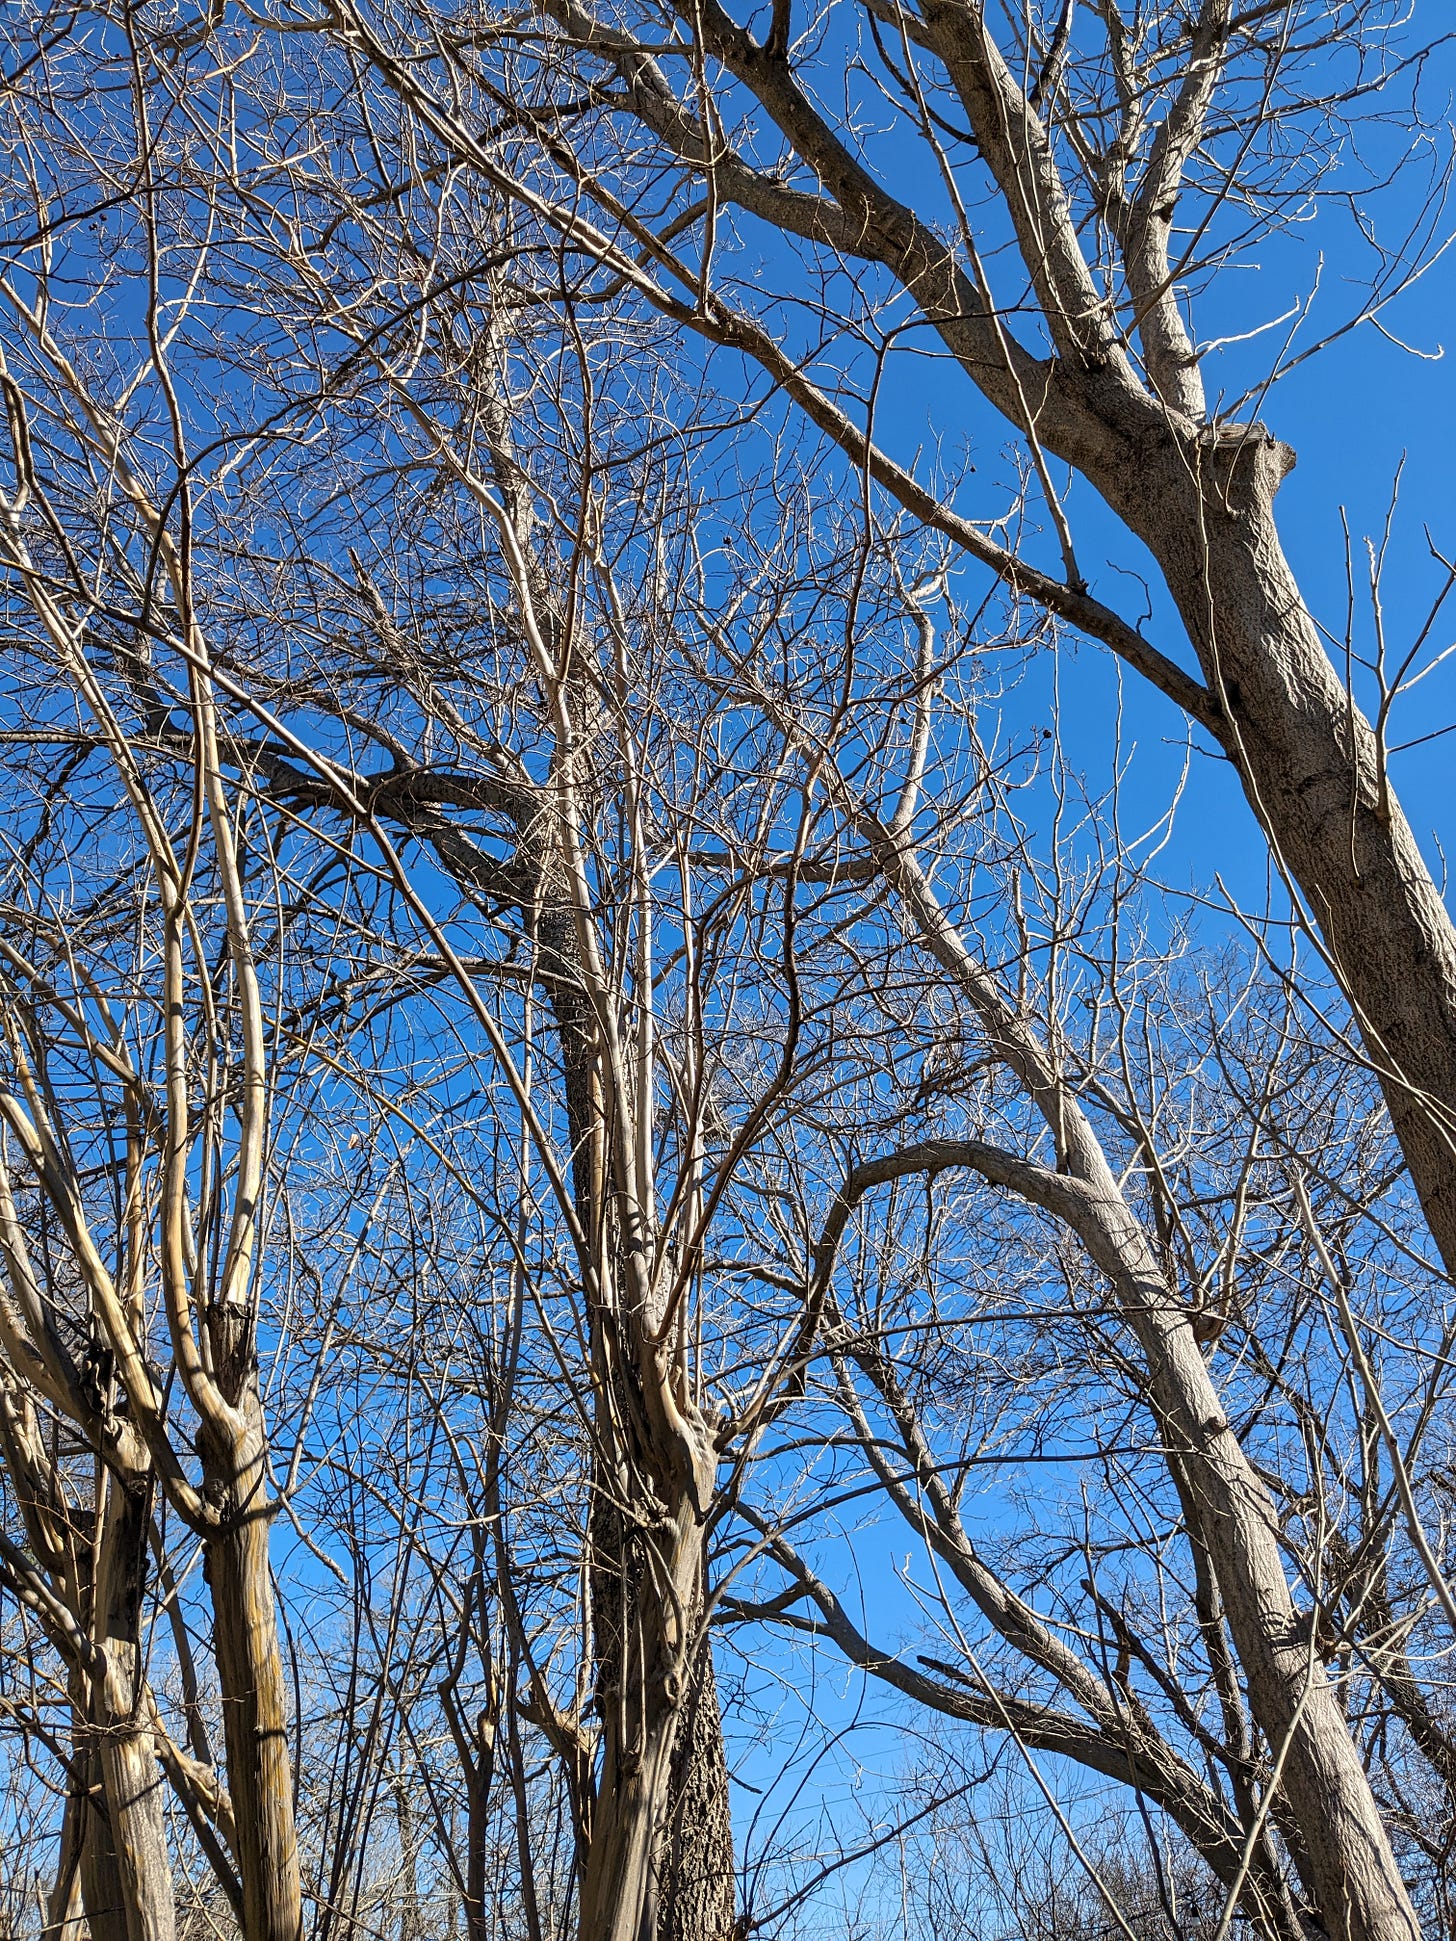 Texas; bone white trees with bare branches